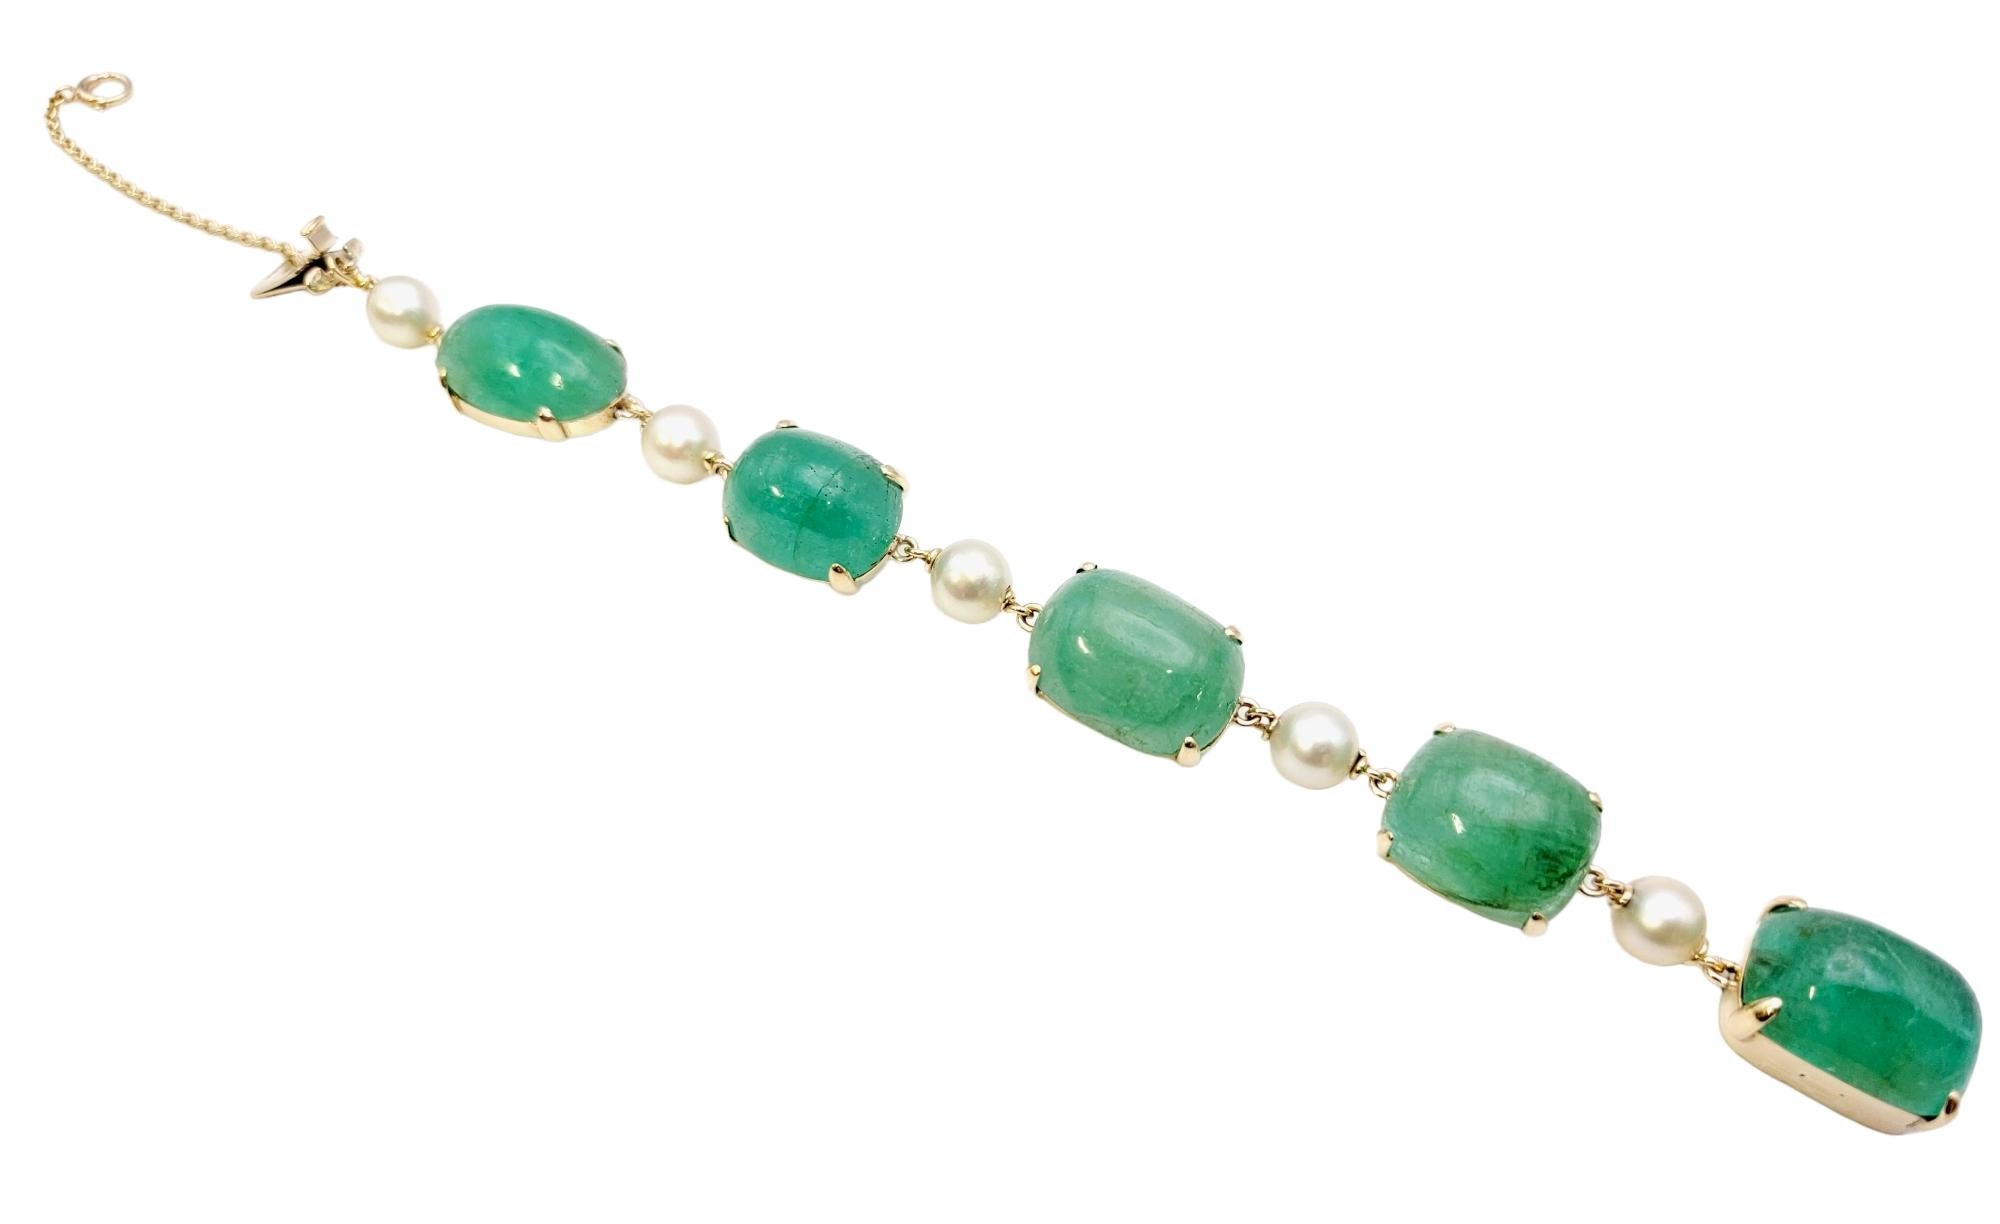 We are thrilled to feature this absolutely stunning bracelet with a bold and beautiful design.  Five incredible natural cabochon emerald stones line the wrist, filling it with color. Each stone is unique in its shade of green and natural variations,